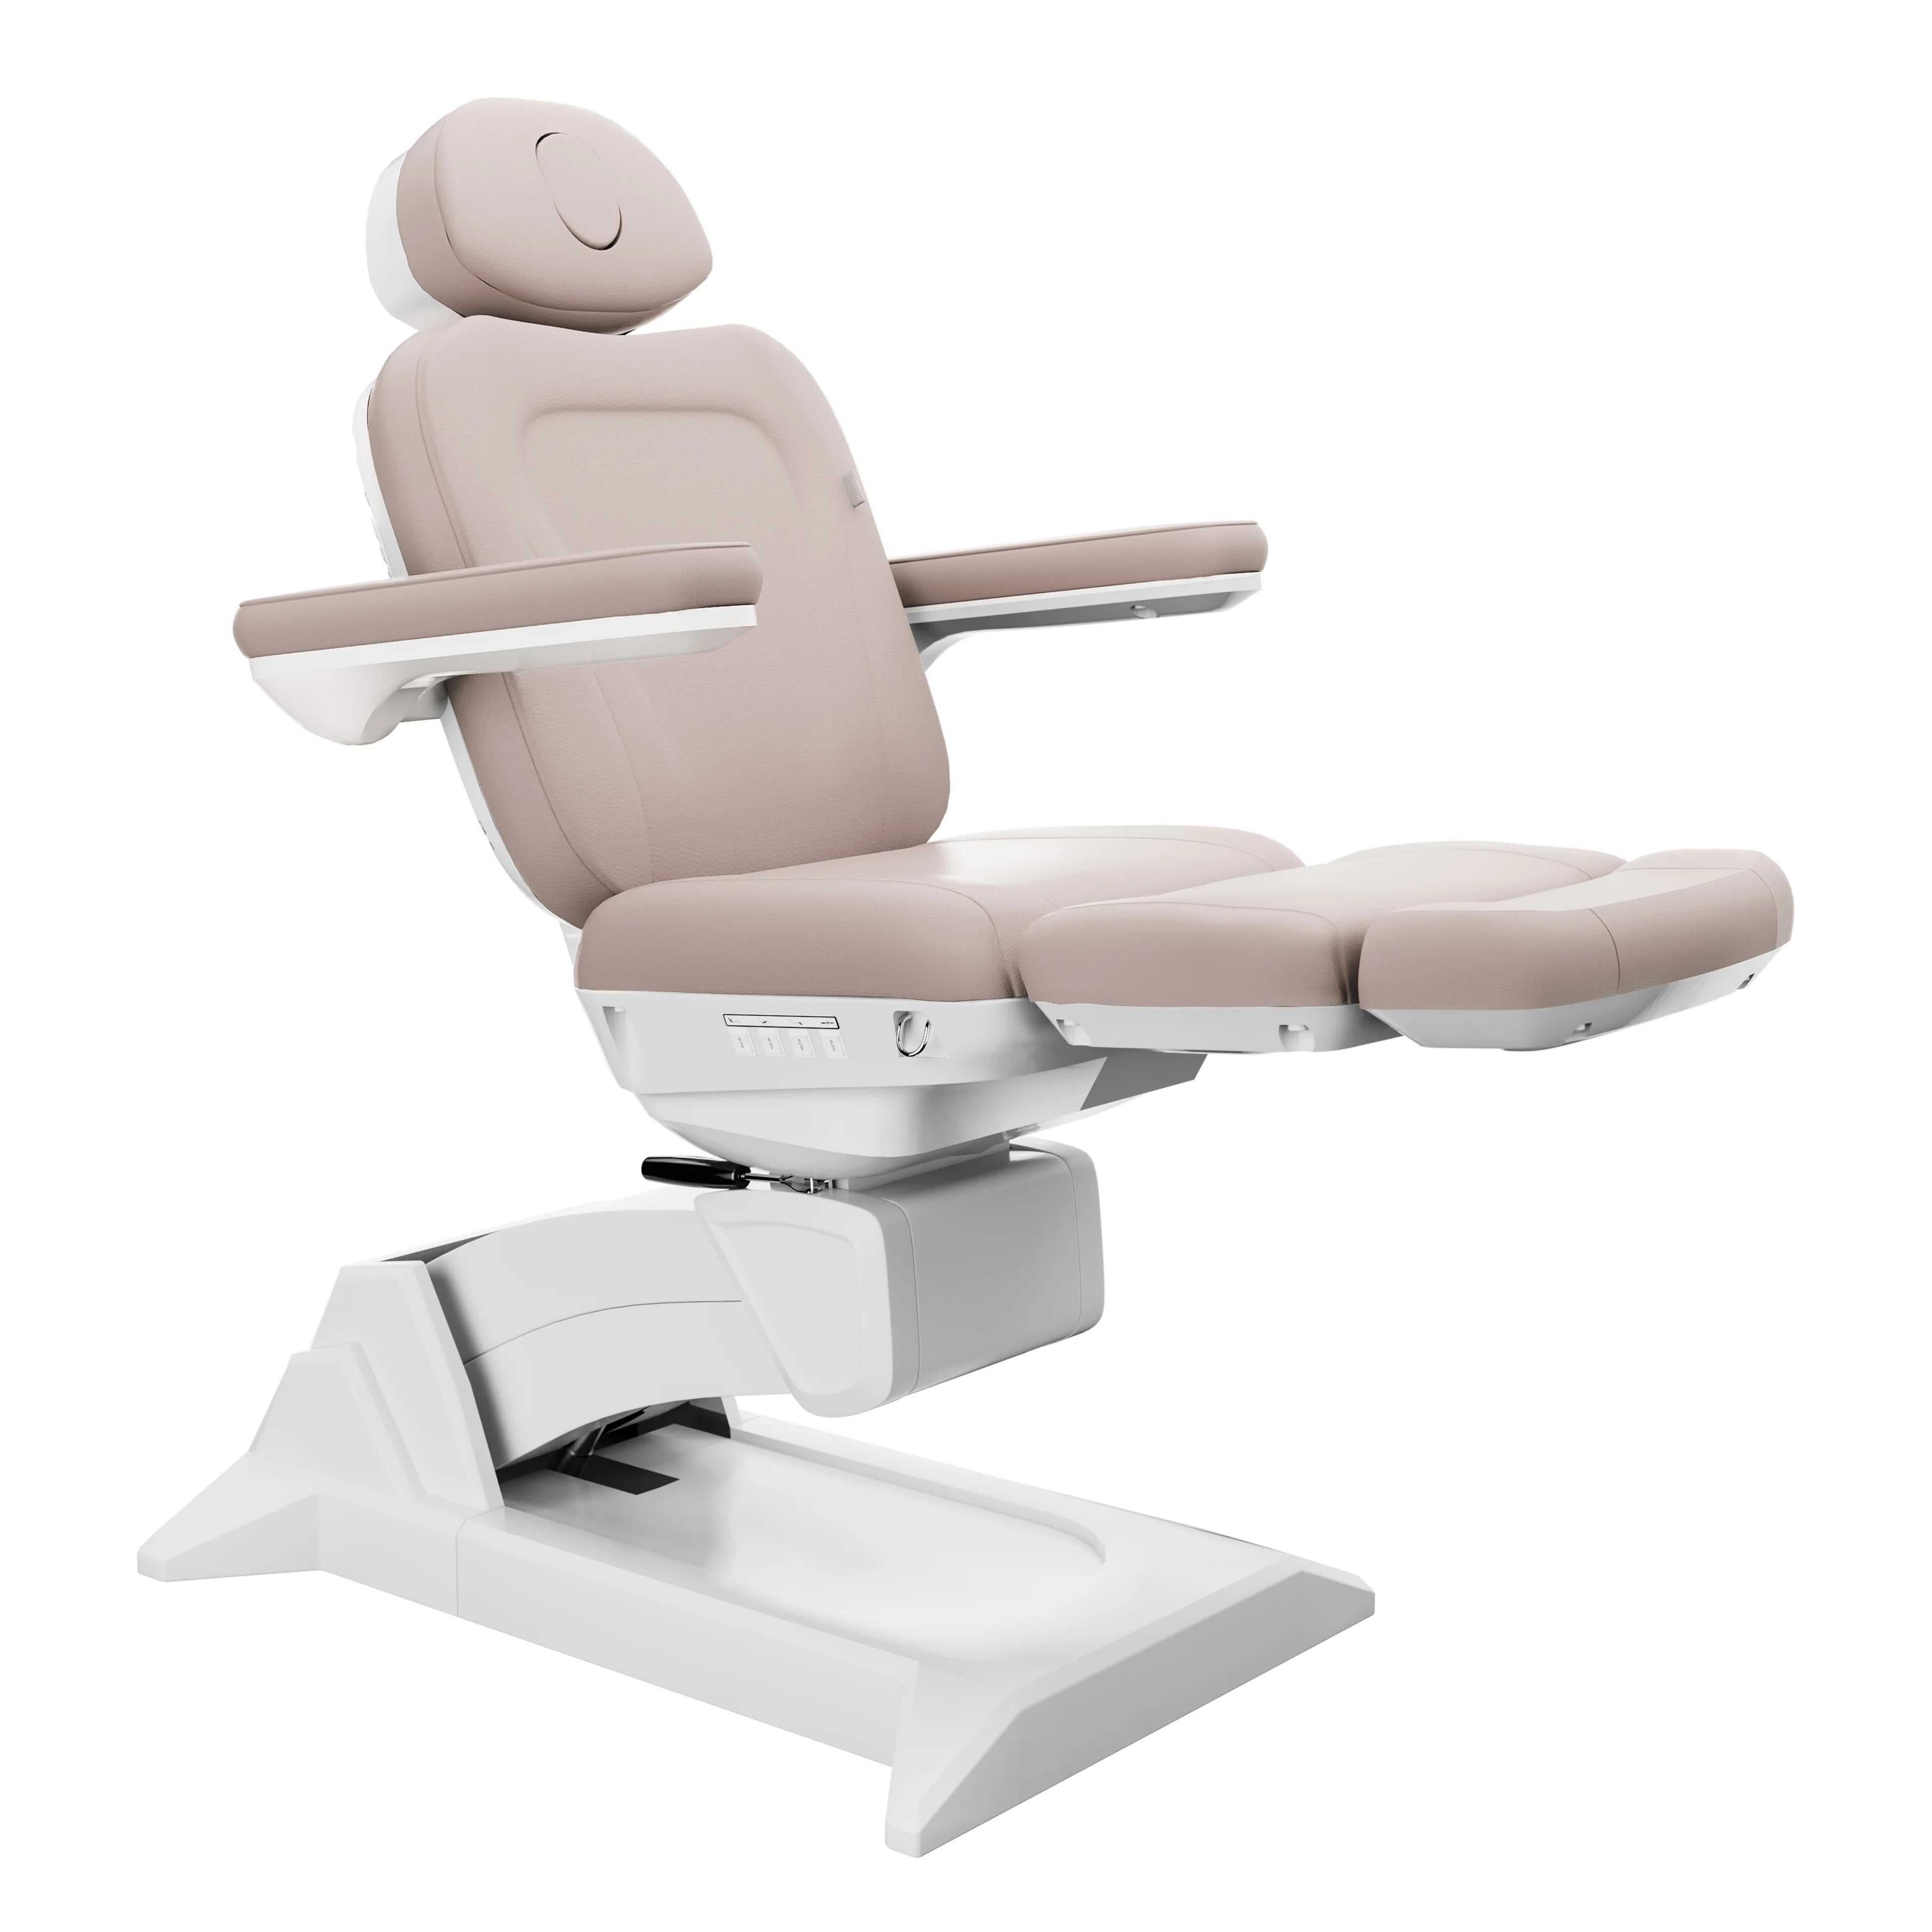 SpaMarc . Ultera (Taupe) . Rotating . 4 Motor Spa Treatment Chair/Bed